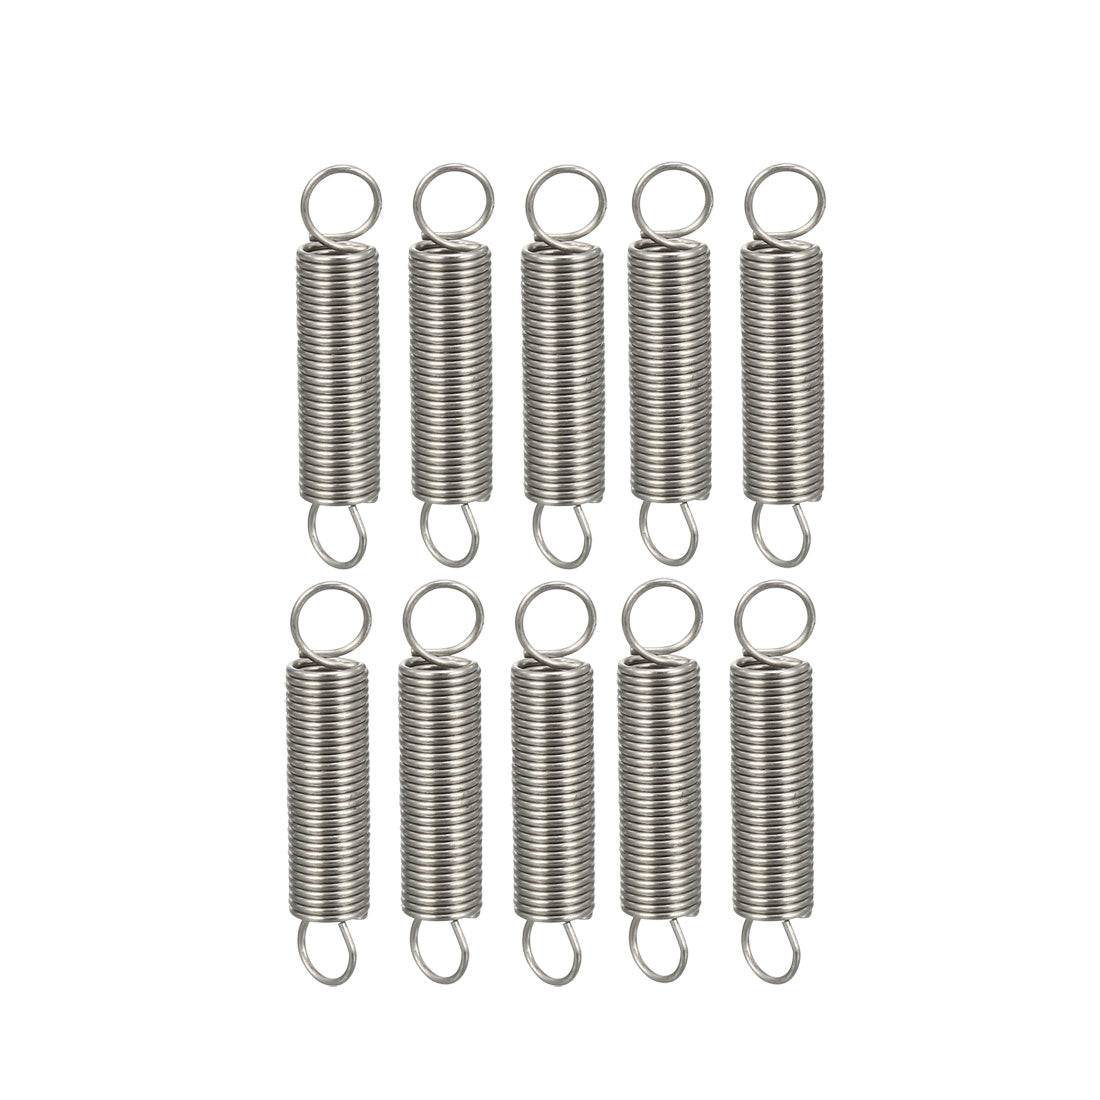 uxcell Uxcell Extended Tension Spring Wire Diameter 0.016", OD 0.16", Free Length 0.79" 10pcs